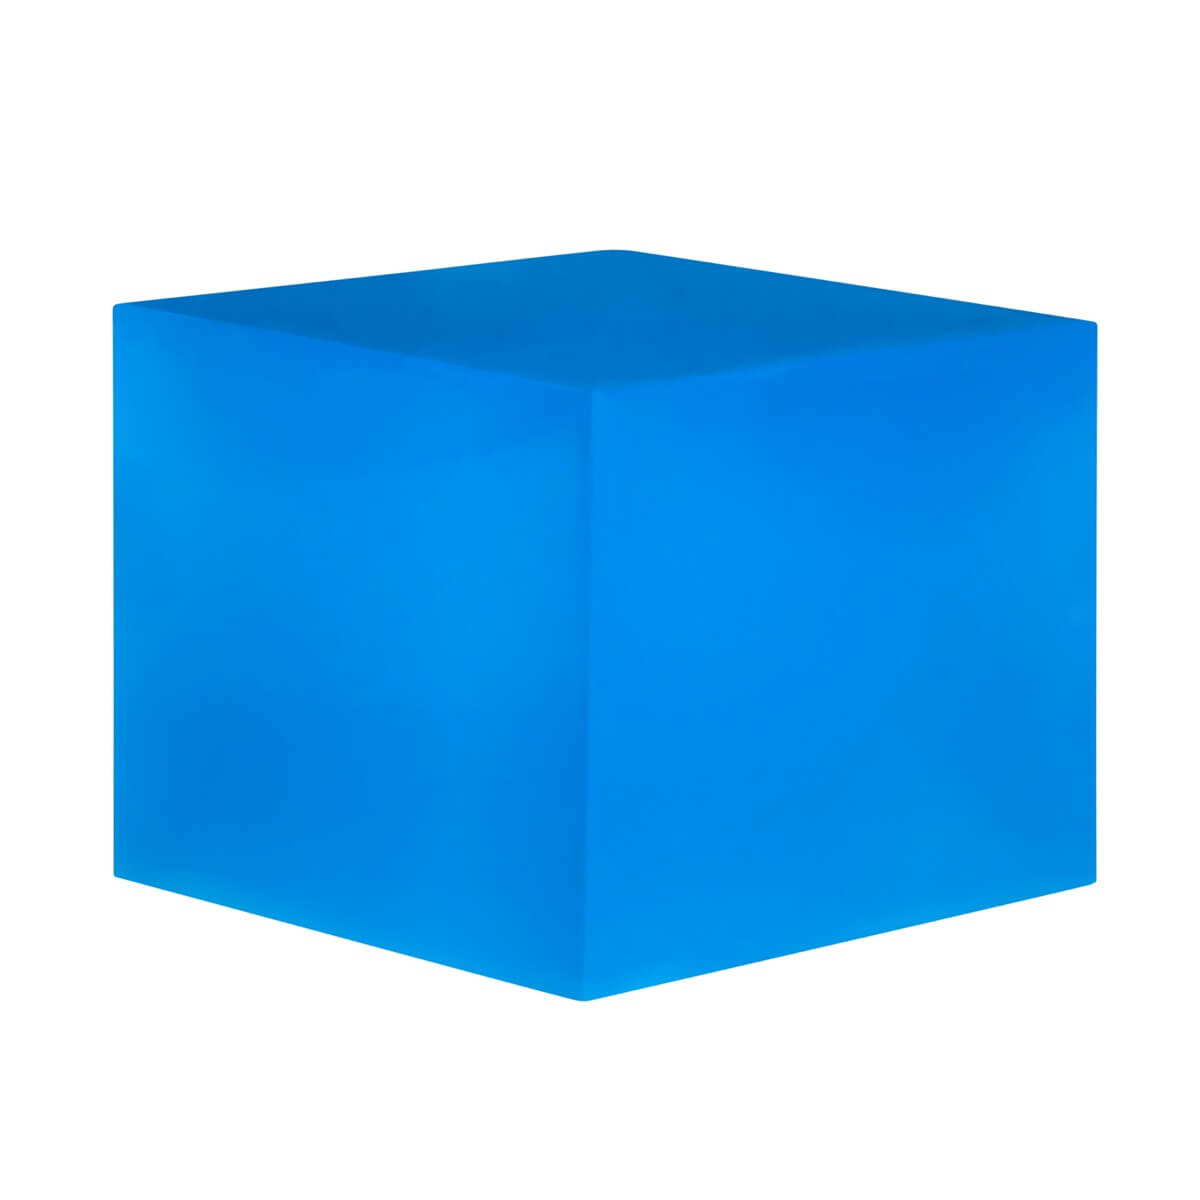 A resin cube made with the Neon Blue Mica Powder Pigment by Pigmently.